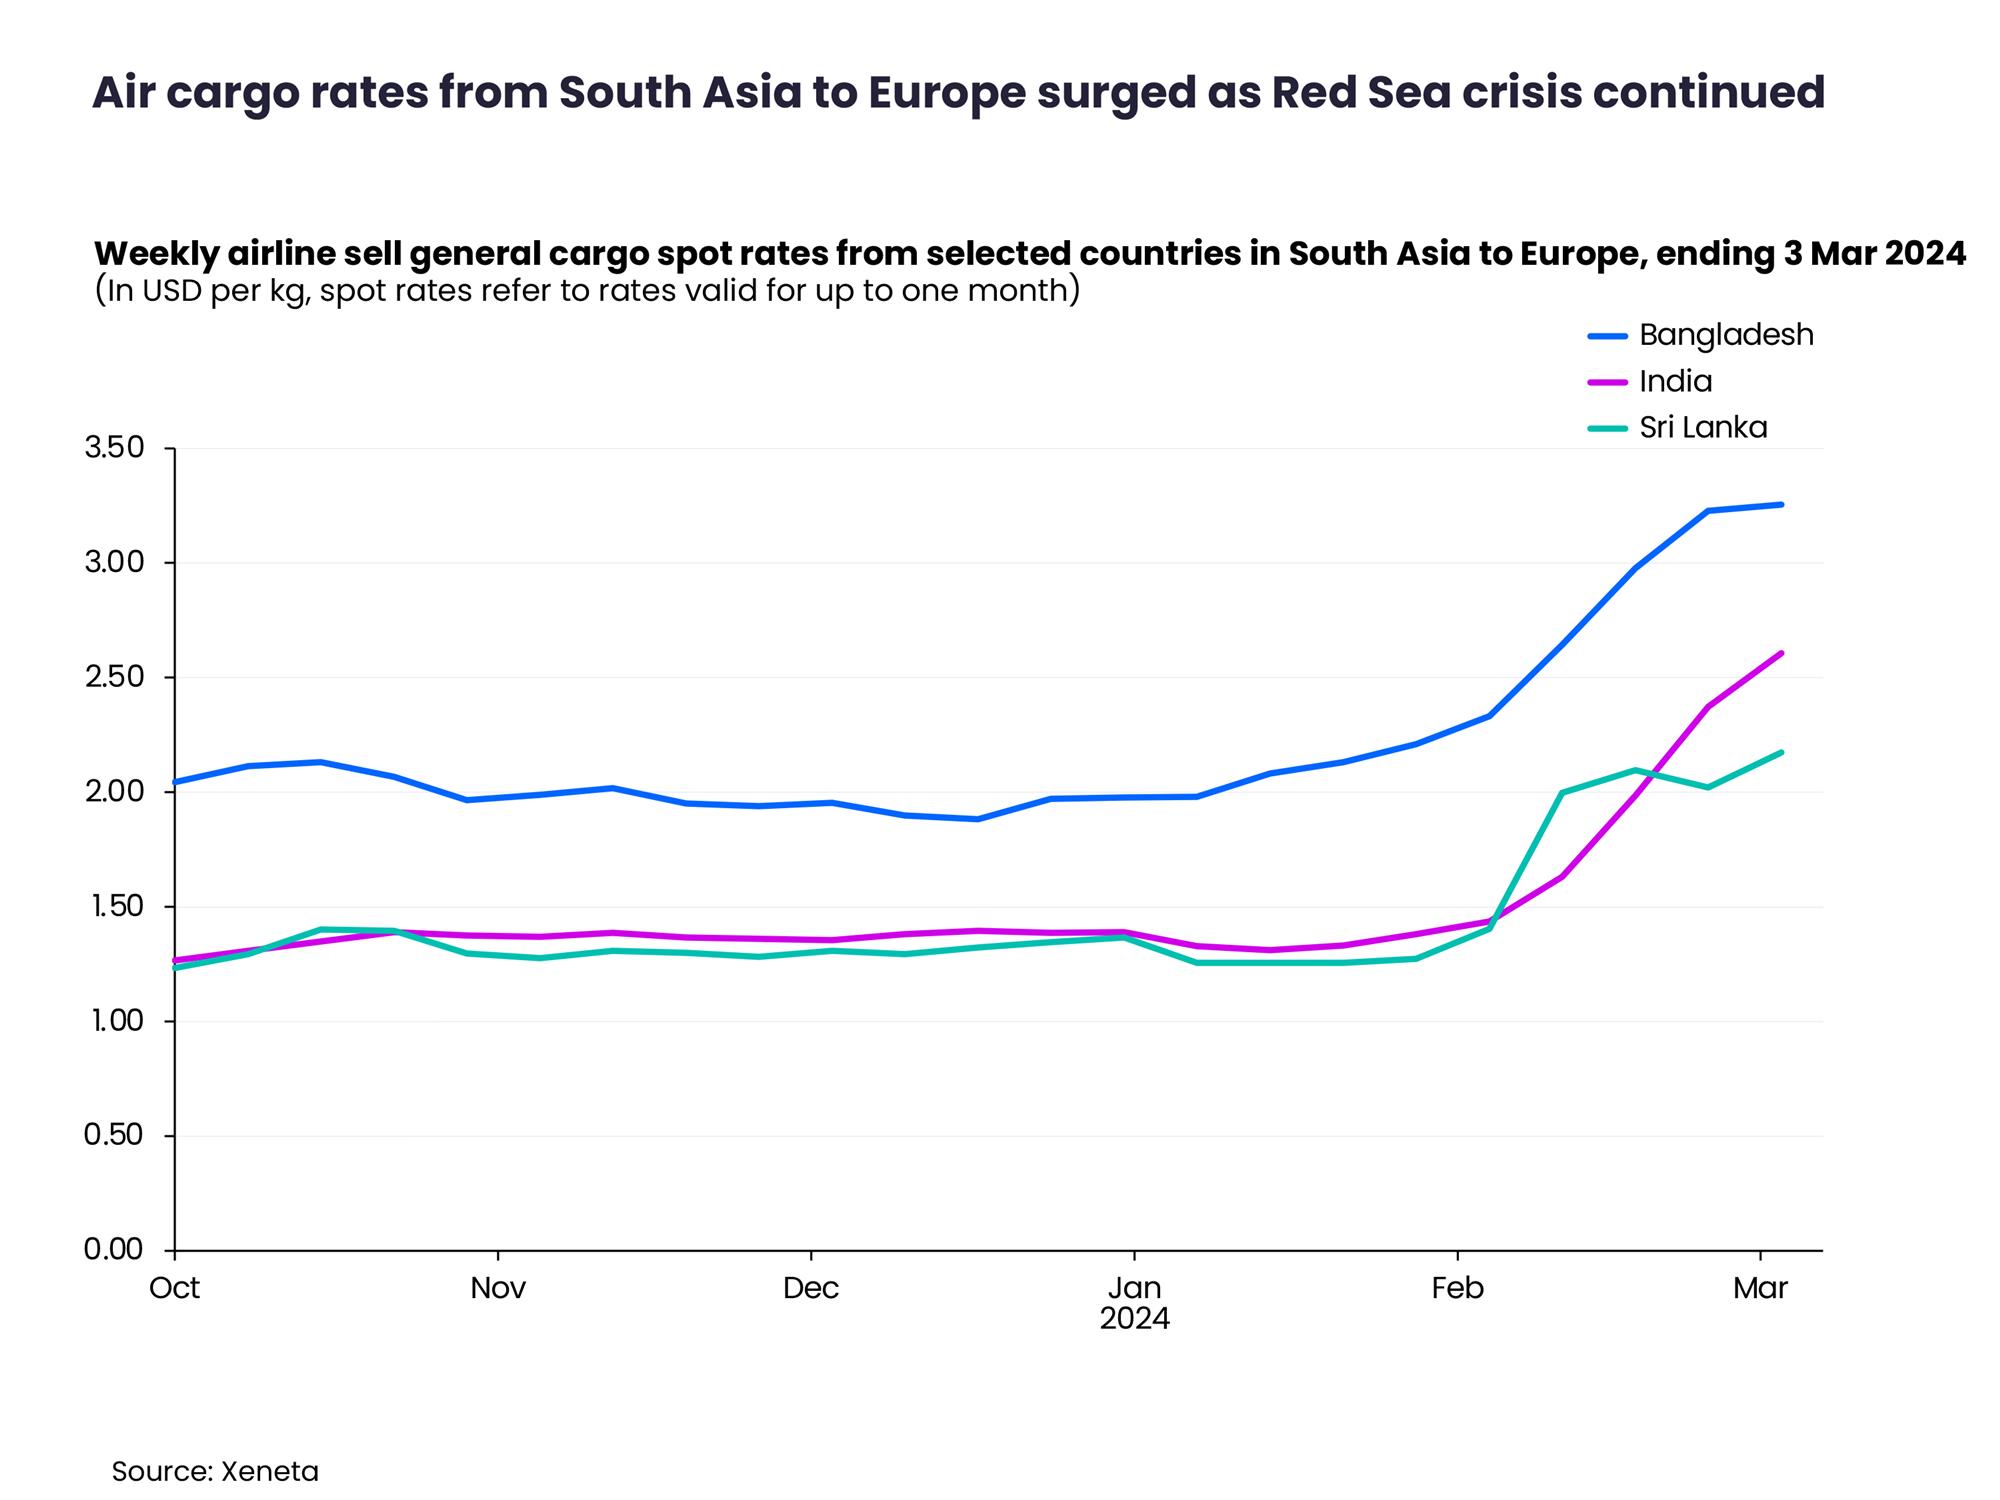 Self Photos / Files - Air cargo rates from South Asia to Europe surged as Red Sea crisis continued